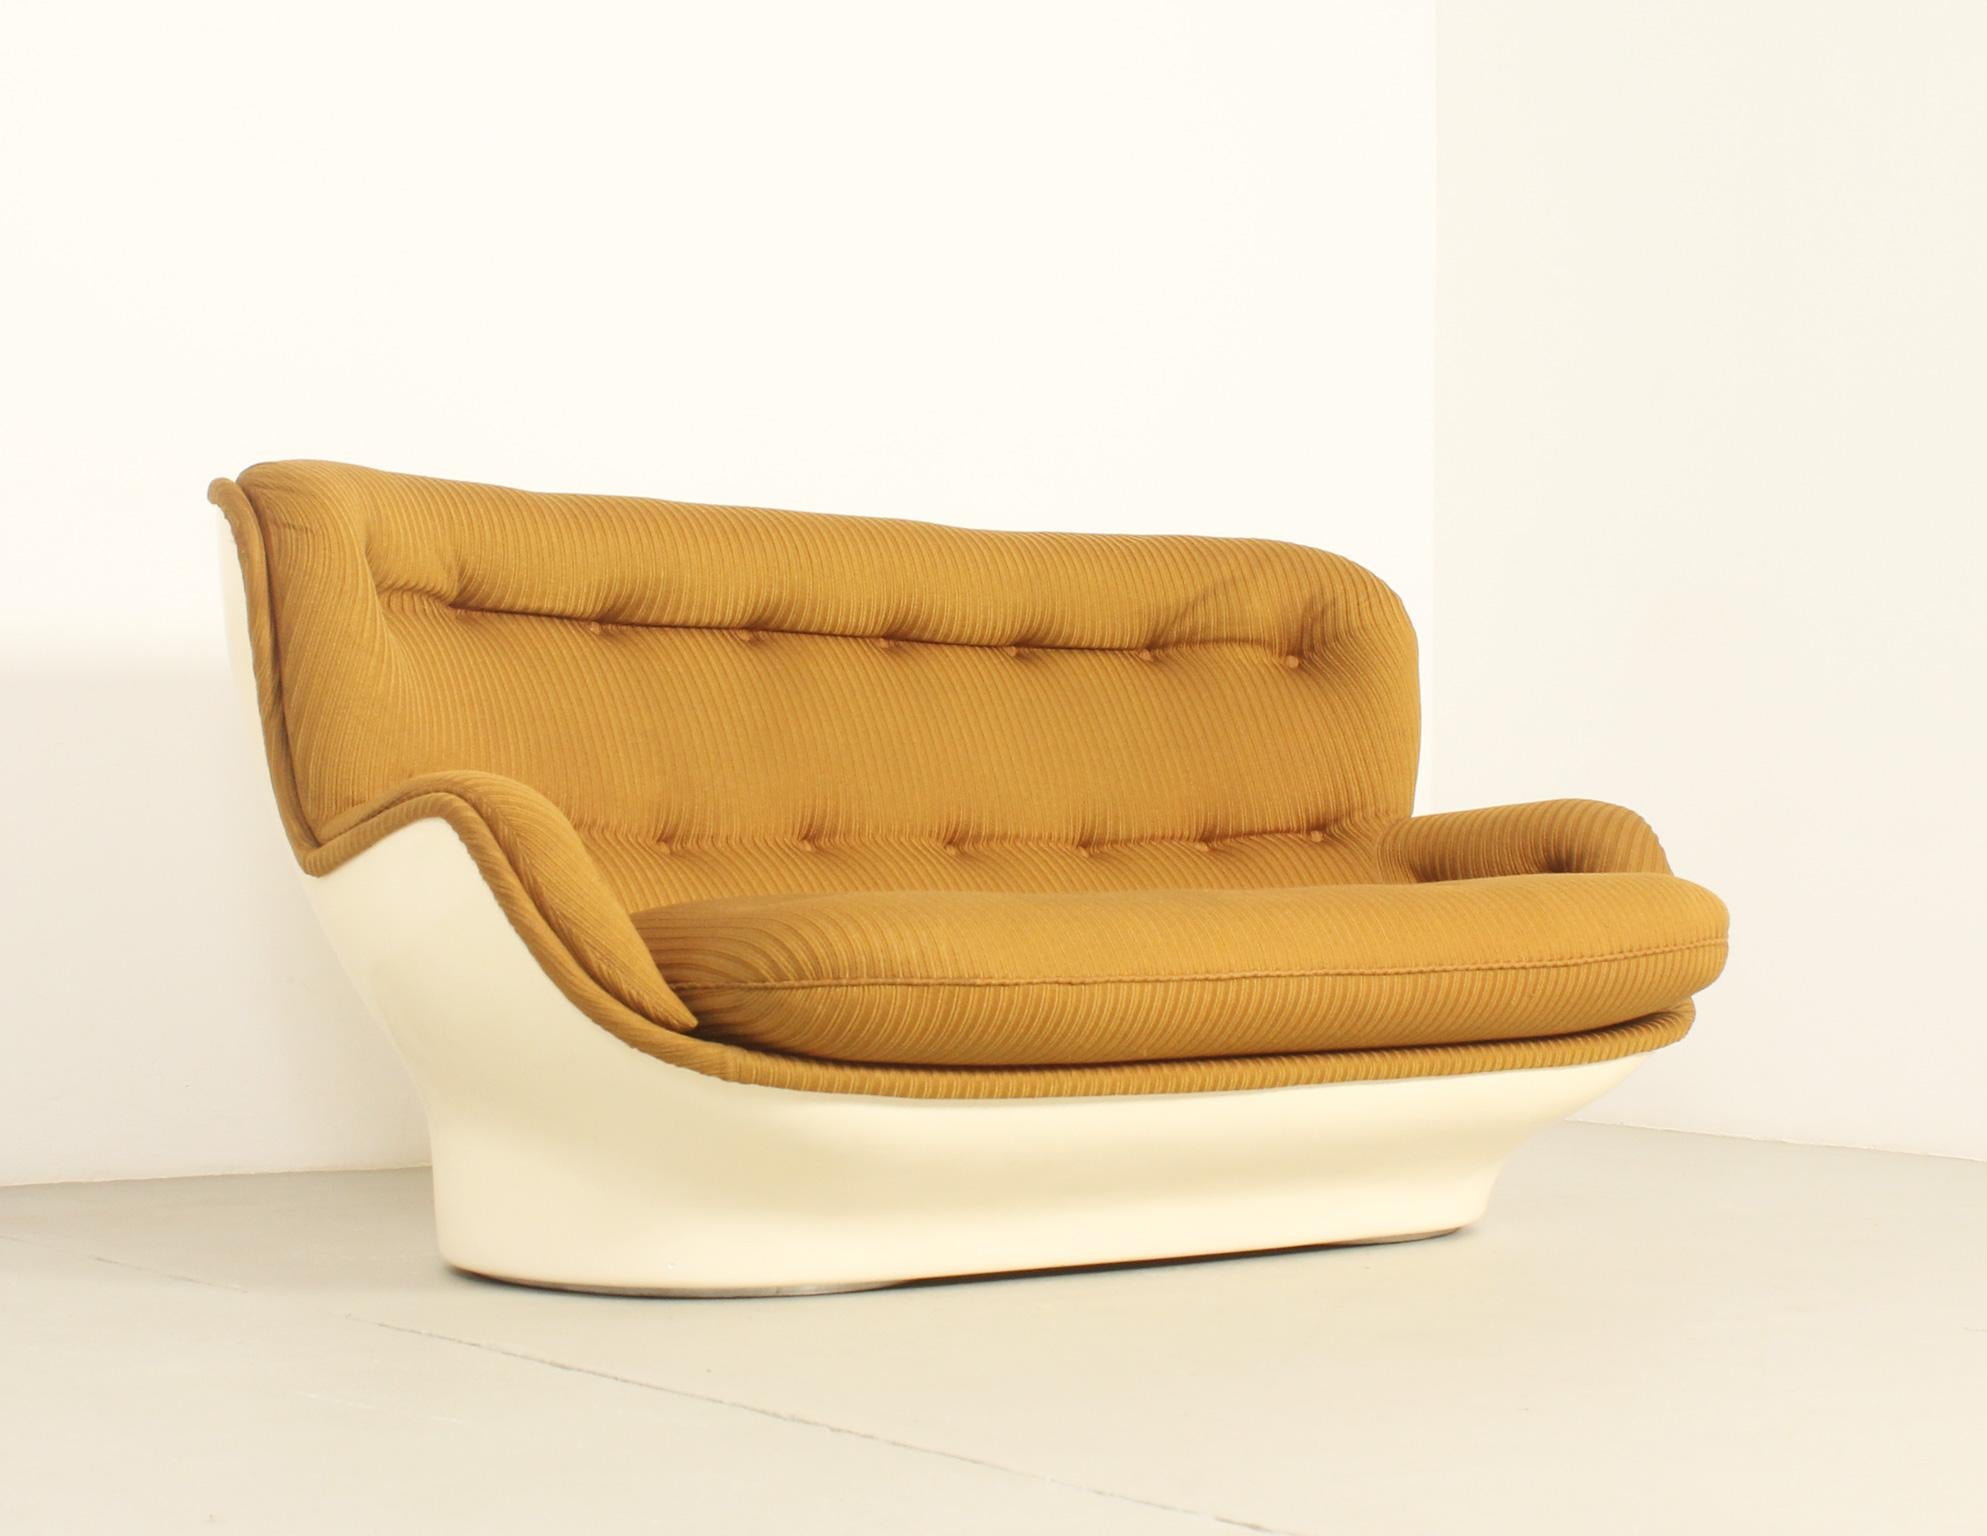 Karate sofa designed in 1970's by Michel Cadestin for Airborne, France. Molded fiberglass shell upholstered with original fabric and loose seat cushion. 